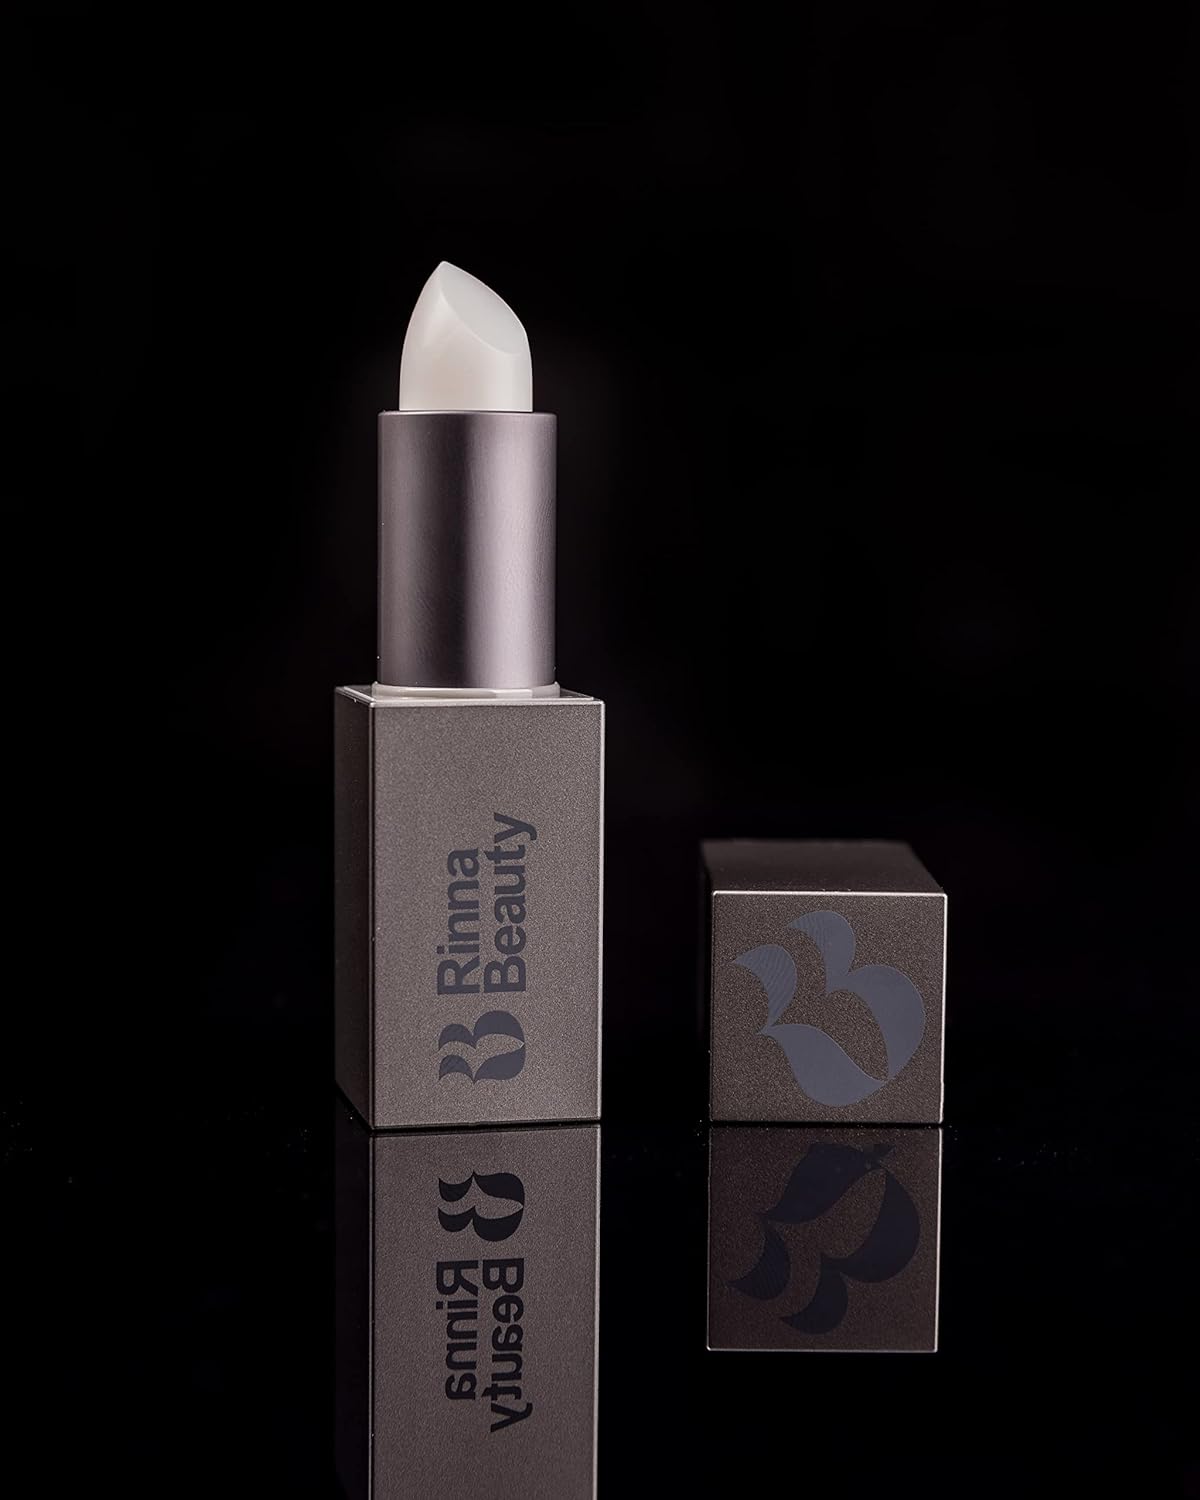 Rinna Beauty - Big Stick Energy Lip Enhancer Stick - Super Hydrating, Moisturizes and Nourishes Lips, Non-Sticky, Super Smooth, and is known to cause a Plumping Effect - Vegan, Cruelty-Free - 1 each - Premium lipstick from Concordia Style Boutique - Just $29.13! Shop now at Concordia Style Boutique